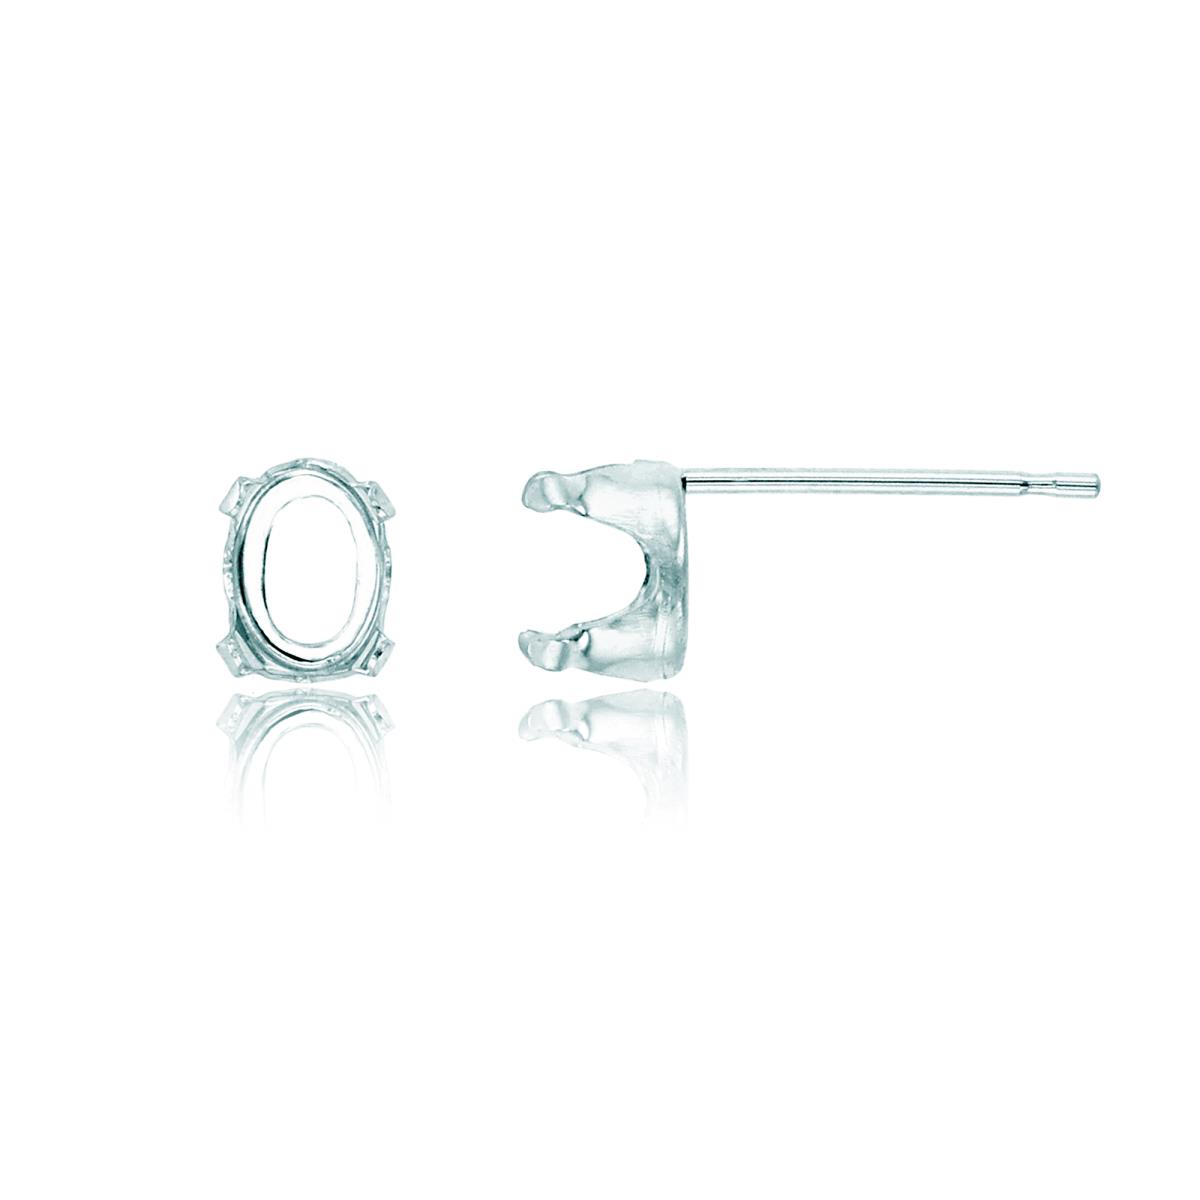 10K White Gold 7x5mm Oval 4-Prong Stud Finding (PR)